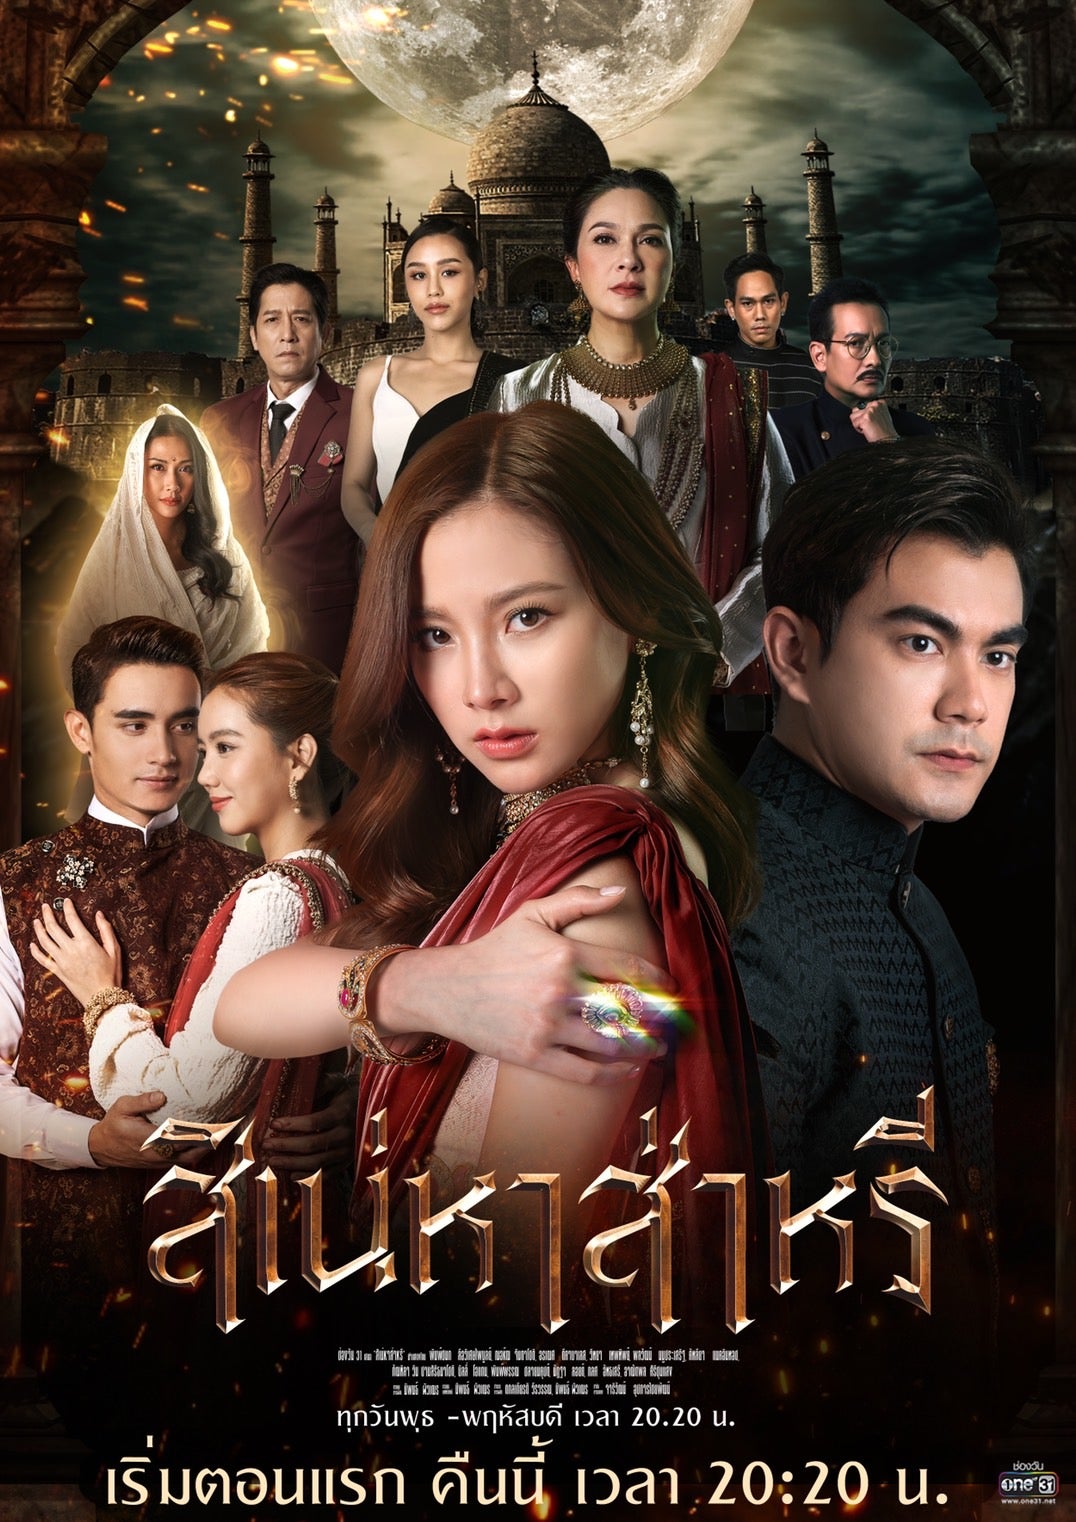 TV ratings for The Curse Of Saree (สิเน่หาส่าหรี) in India. One31 TV series